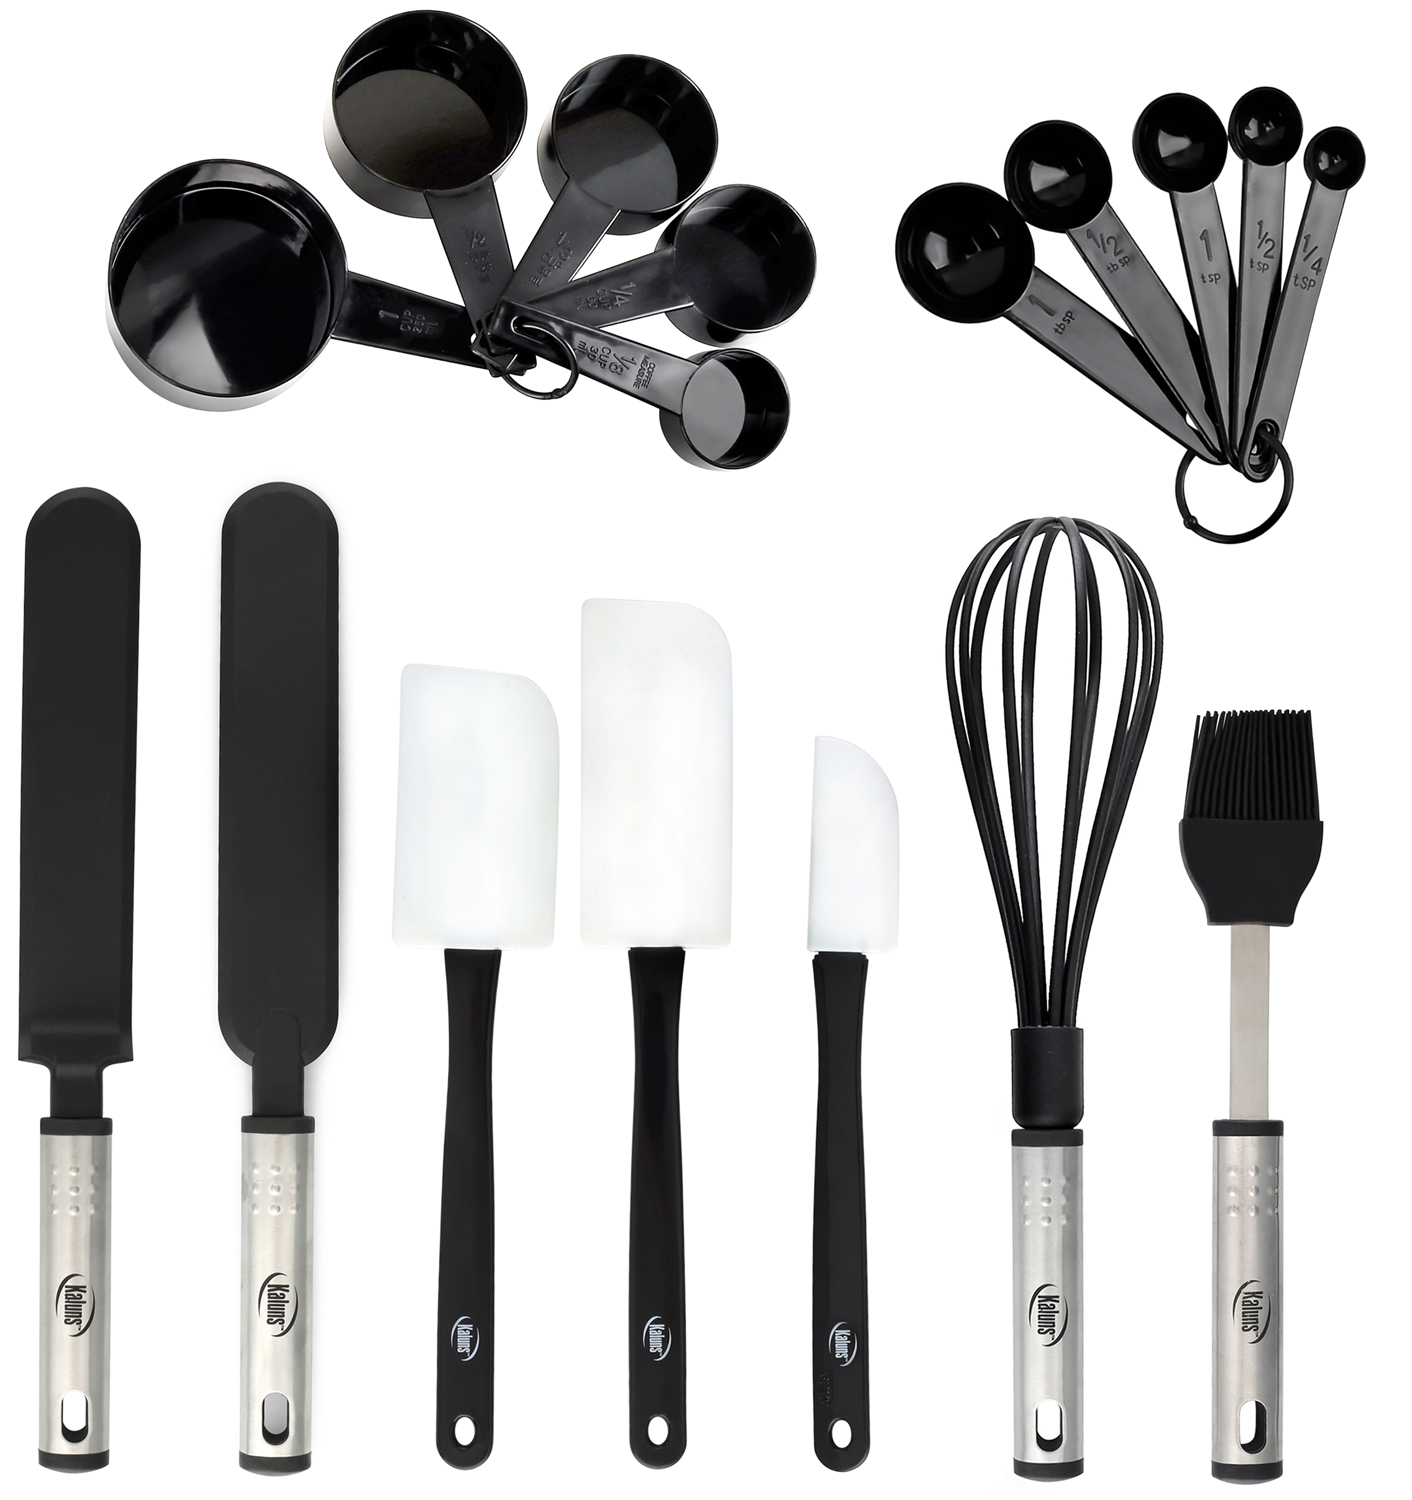 Baking Utensils - 17 Nylon Stainless Steel Baking Supplies - Non-Stick and Heat Resistant Bakeware set - New Baker's Gadget Tools Collection - Great Silicone Spatula - Best Holiday Gift Idea. - image 1 of 7